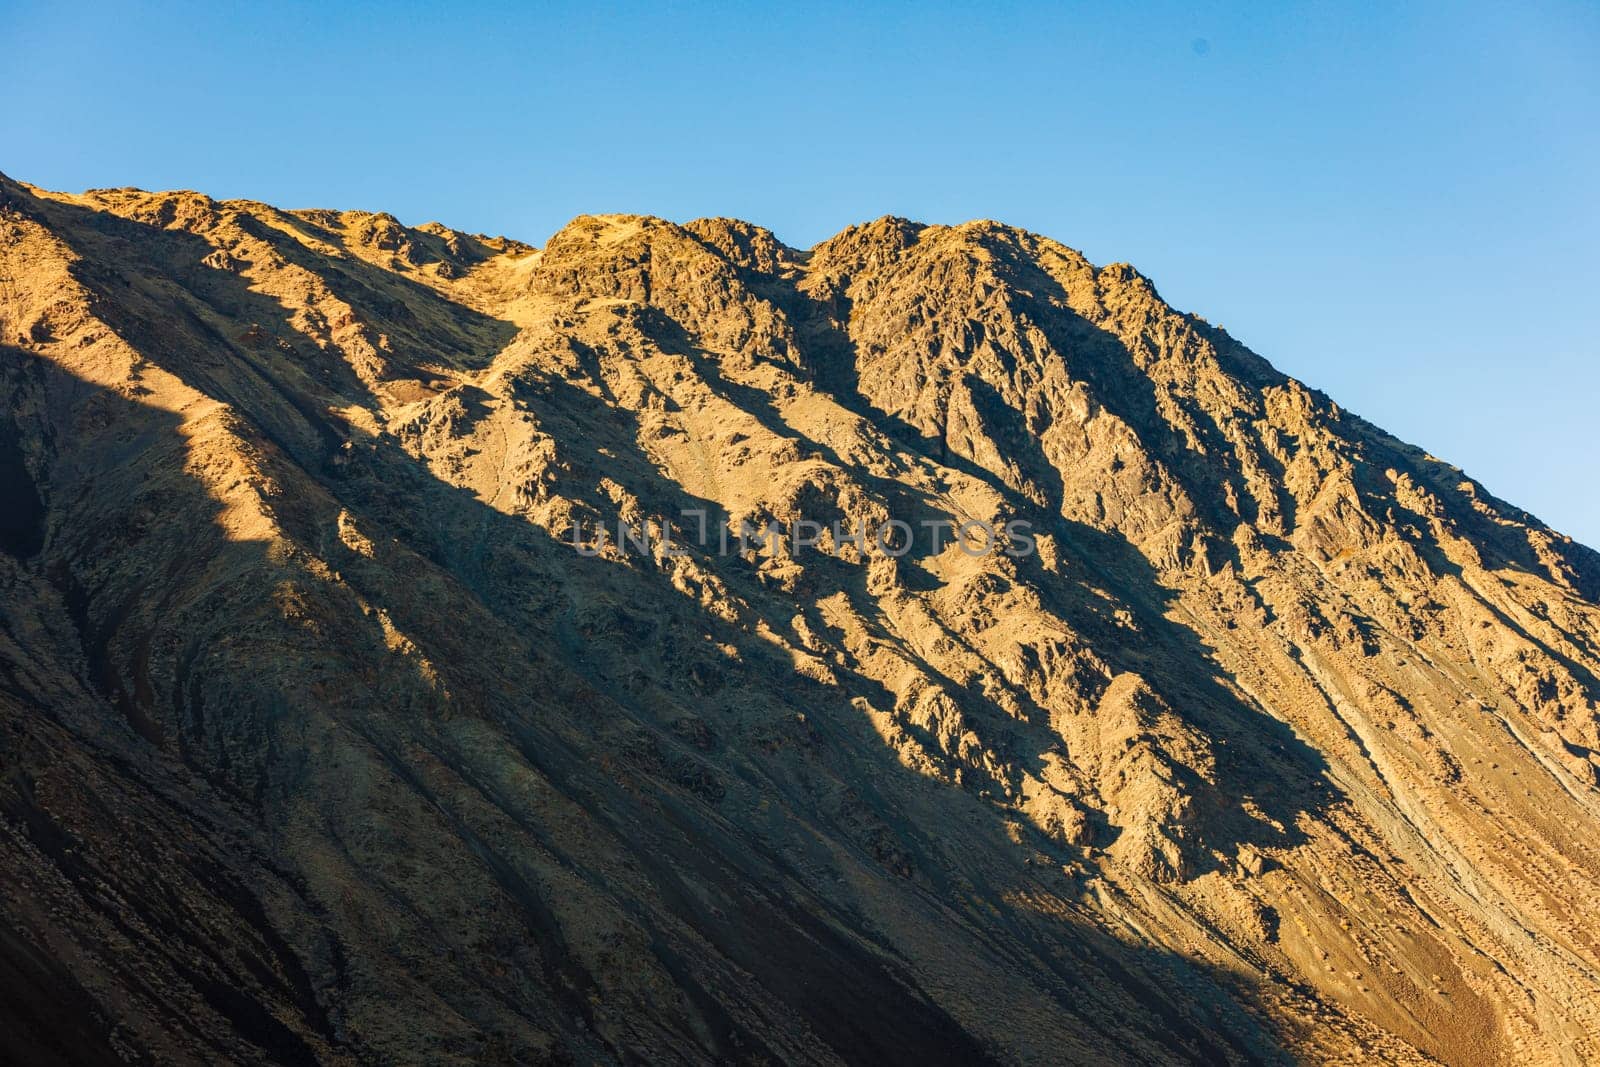 Natural landscape featuring a close up telephoto view of a mountain side slope under direct evening sun light with clear blue sky above.